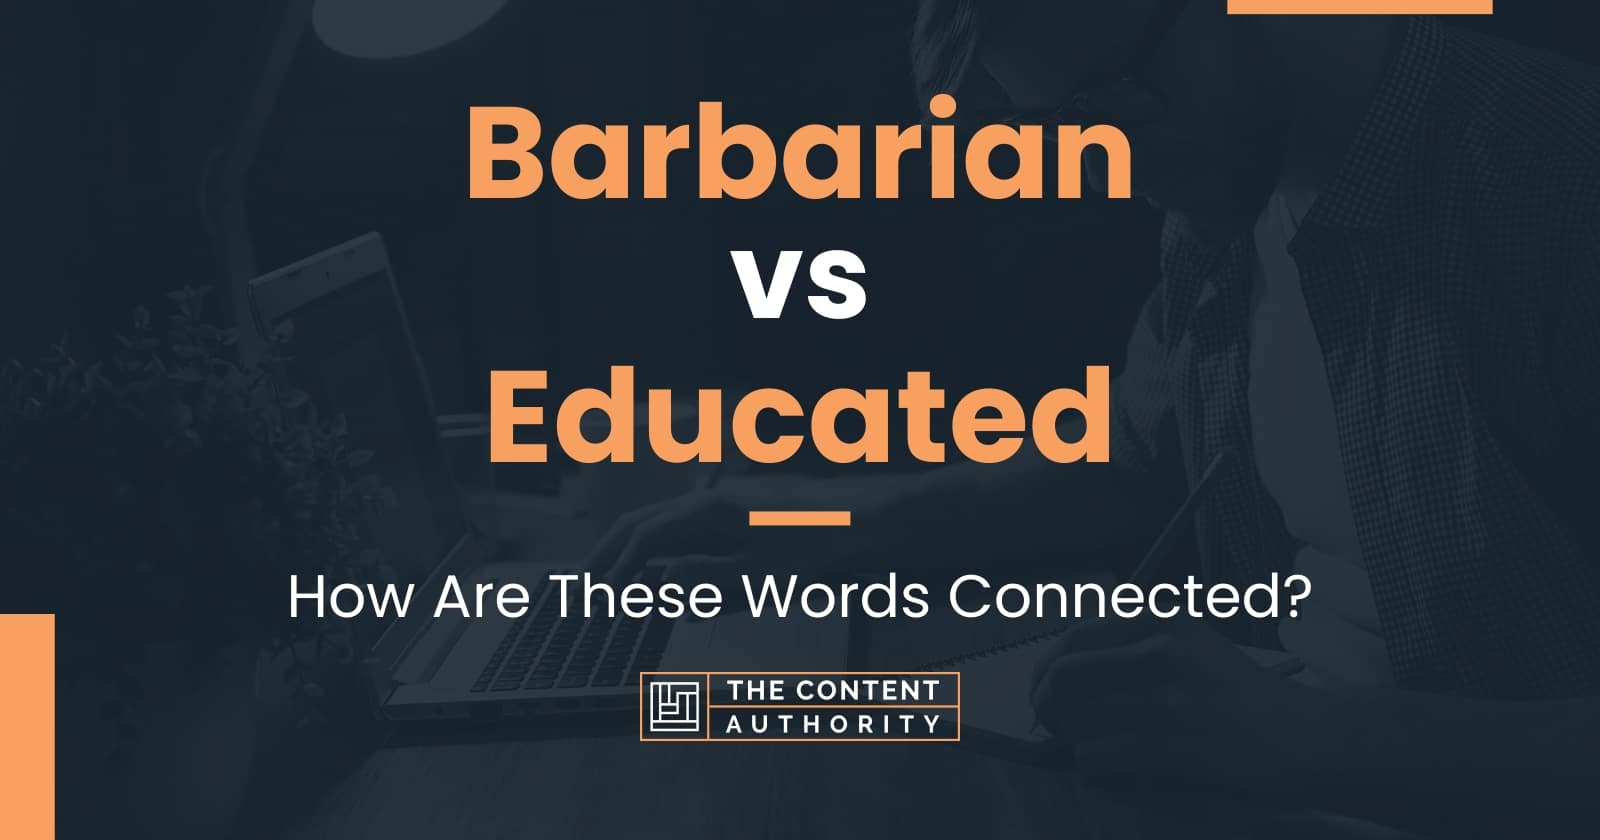 Barbarian vs Educated: How Are These Words Connected?